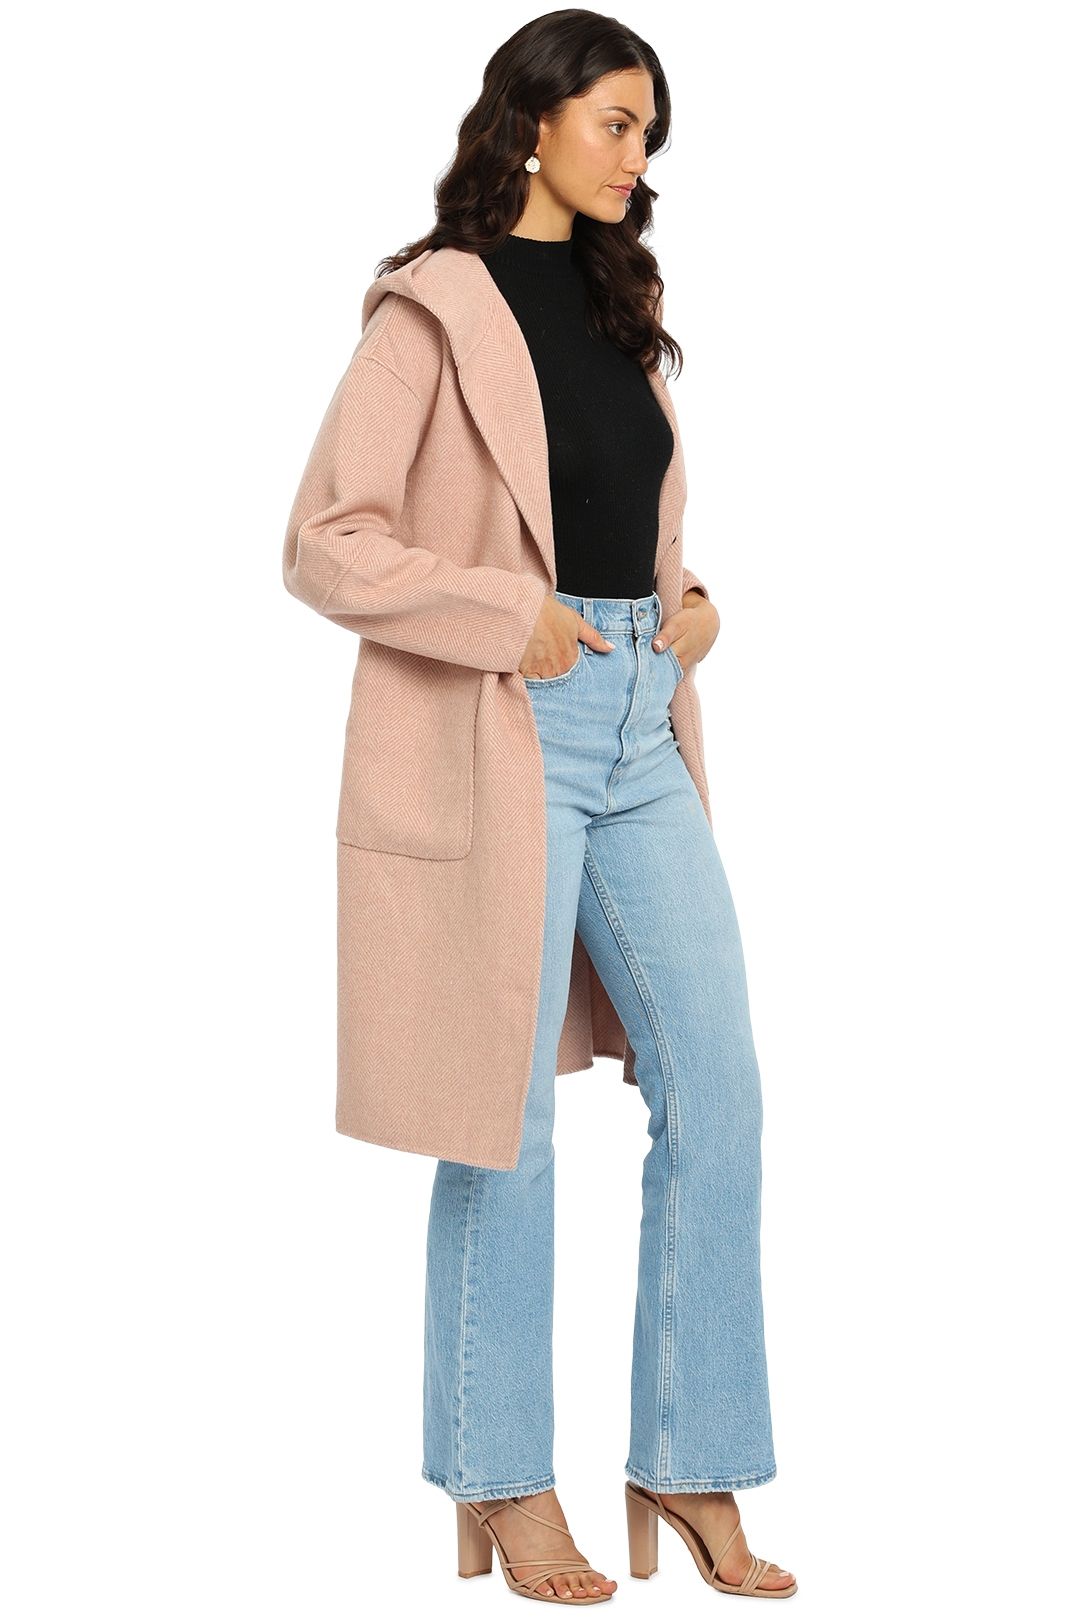 Belle and Bloom Walk This Way Coat Pink Midi